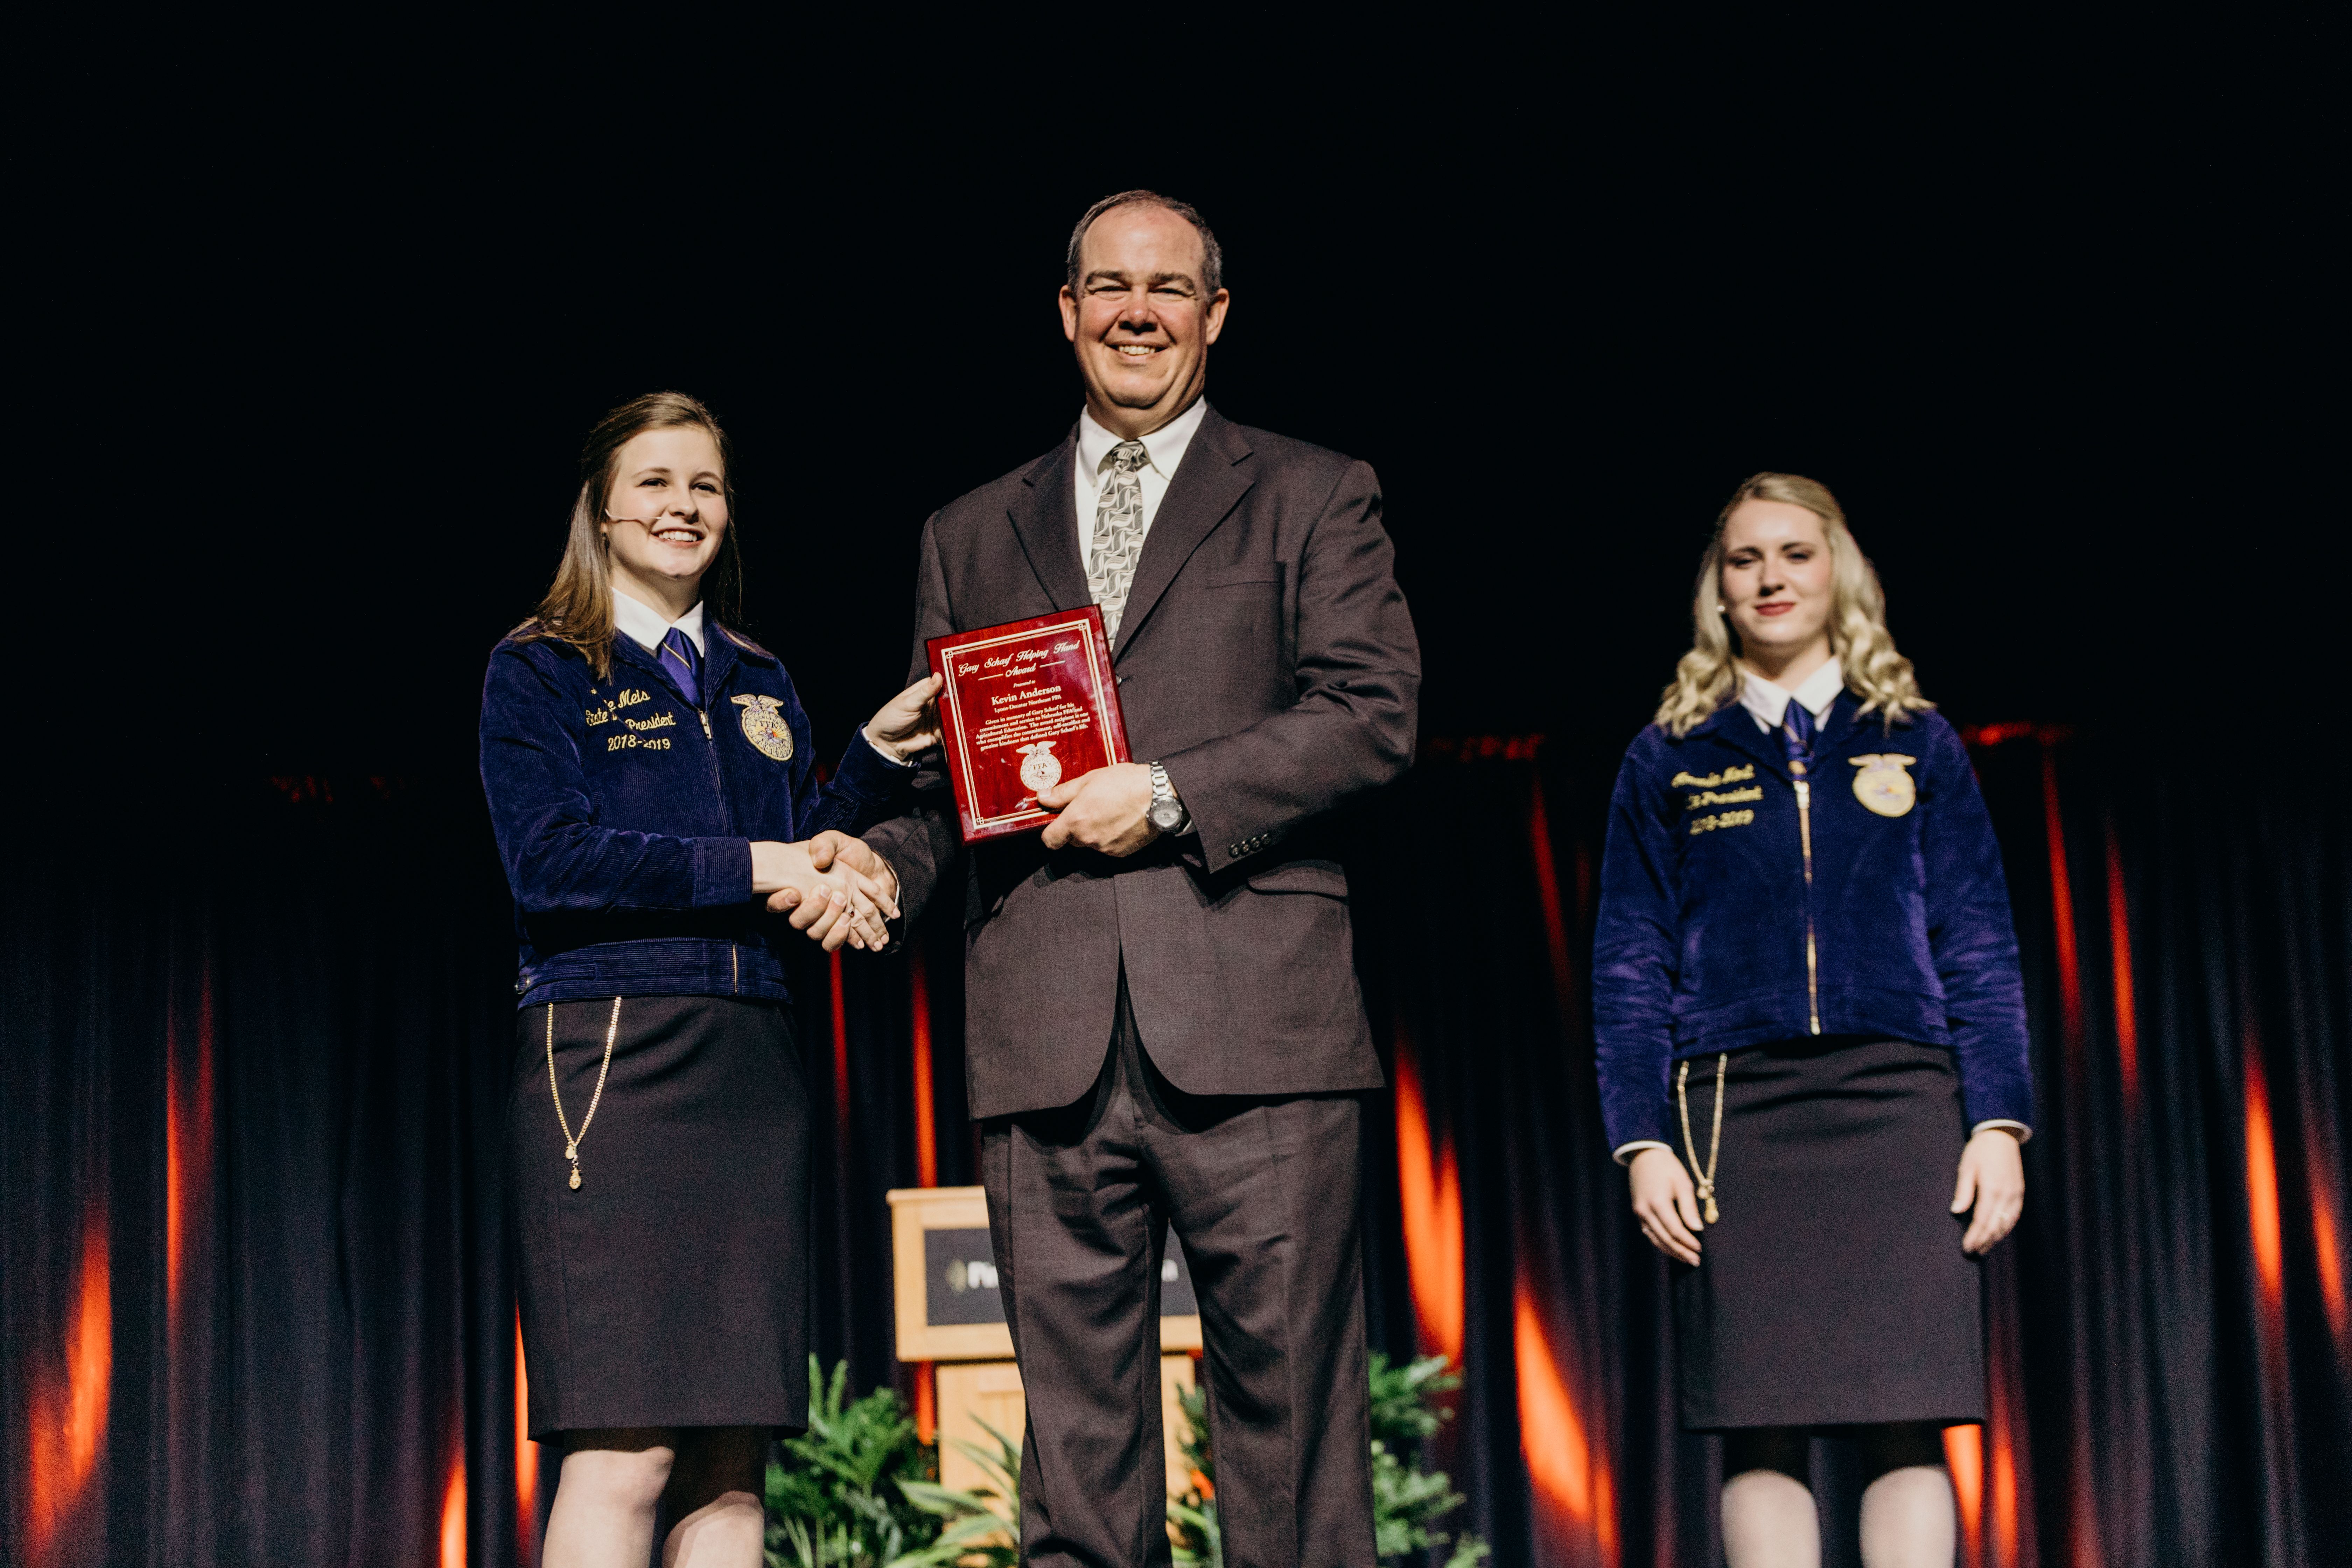 Nominate a Deserving Agriculture Teacher for the "Gary Scharf Helping Hand Award"